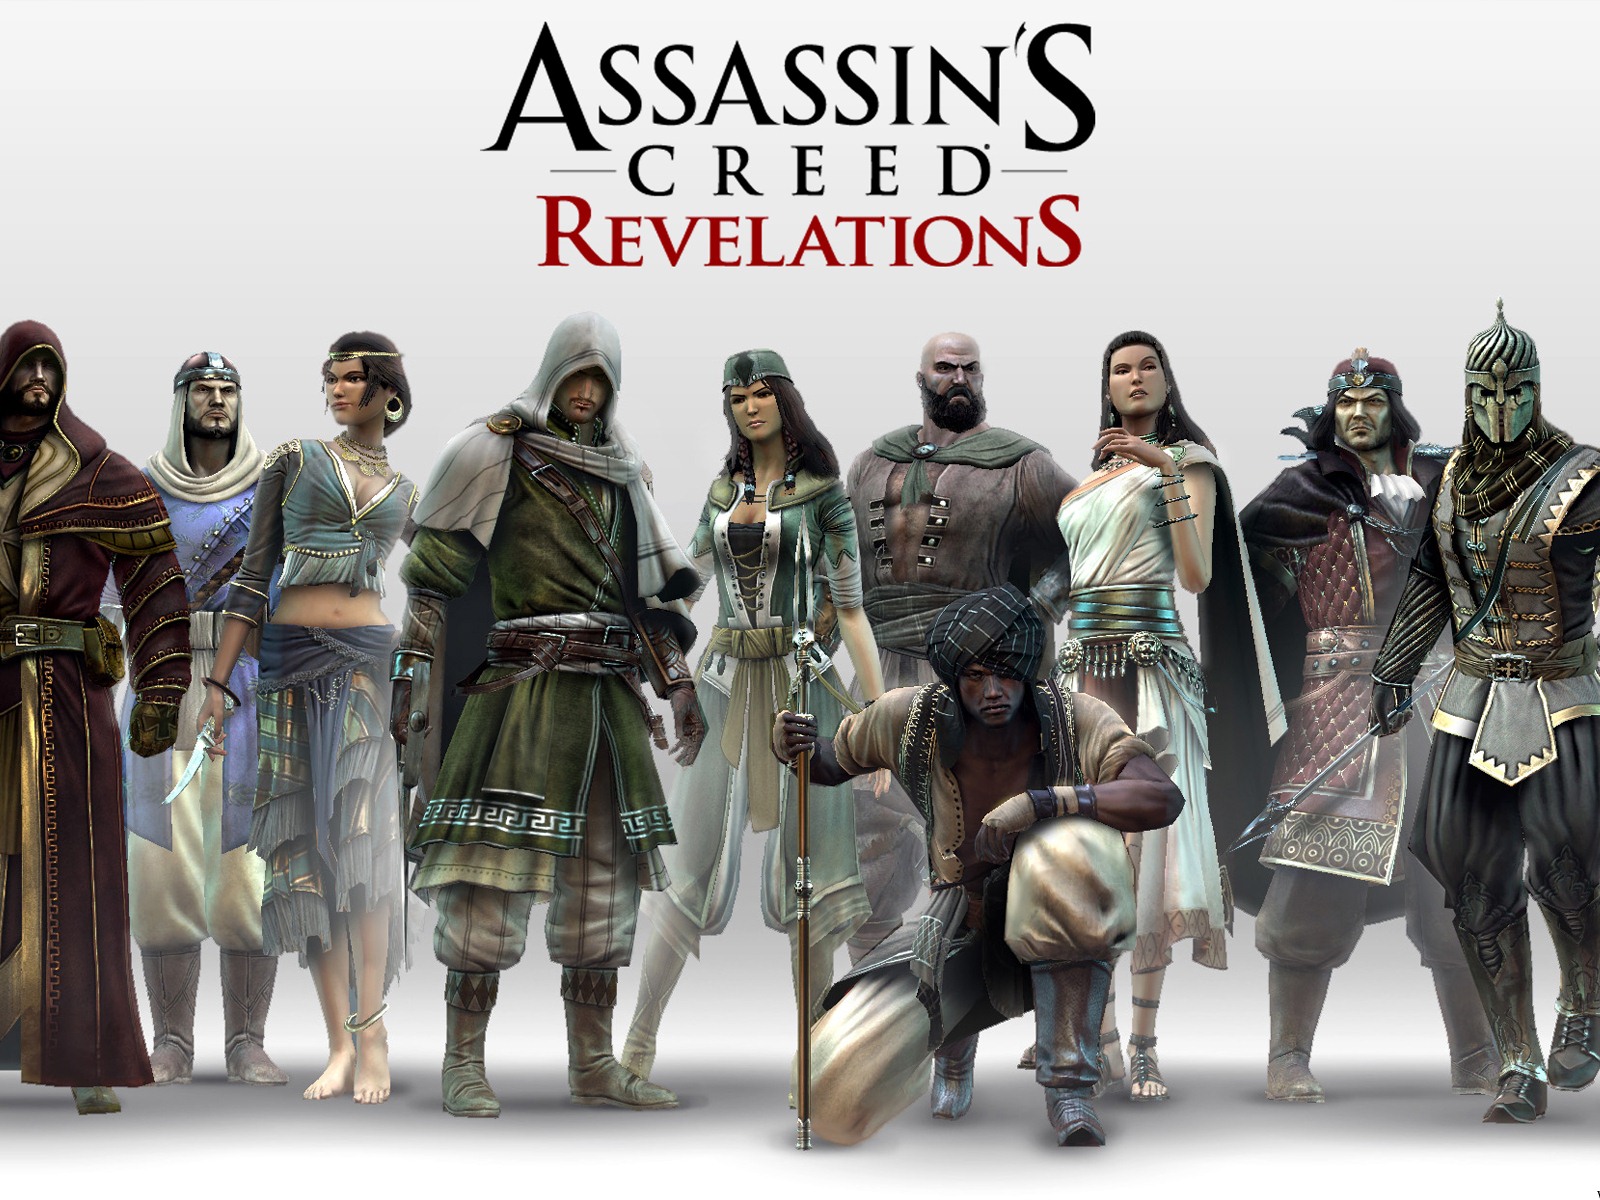 Assassin's Creed: Revelations HD wallpapers #27 - 1600x1200